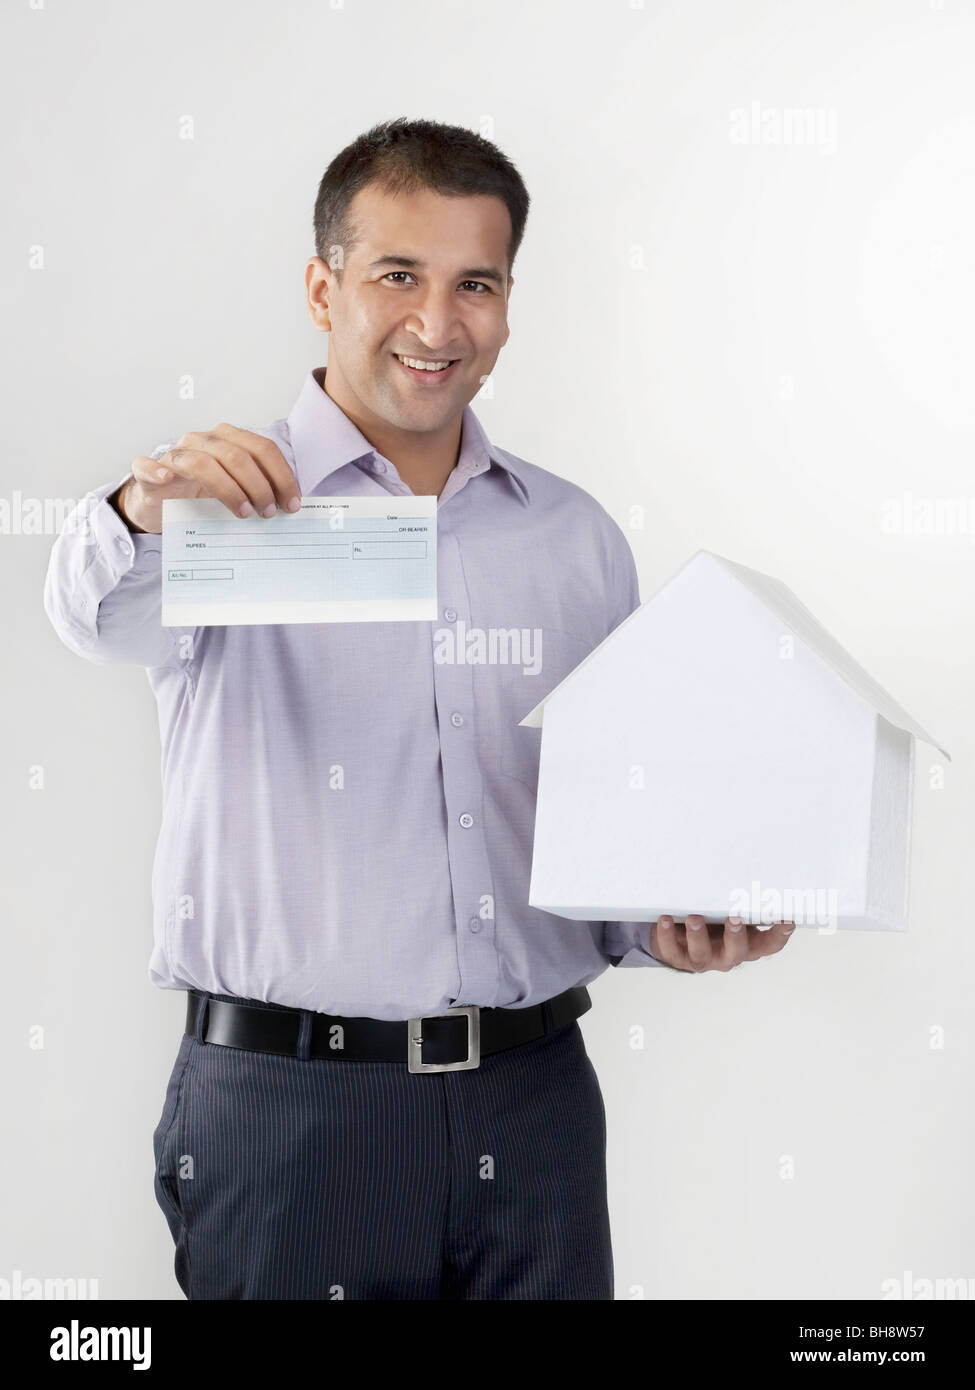 Man holding a house model and cheque Stock Photo